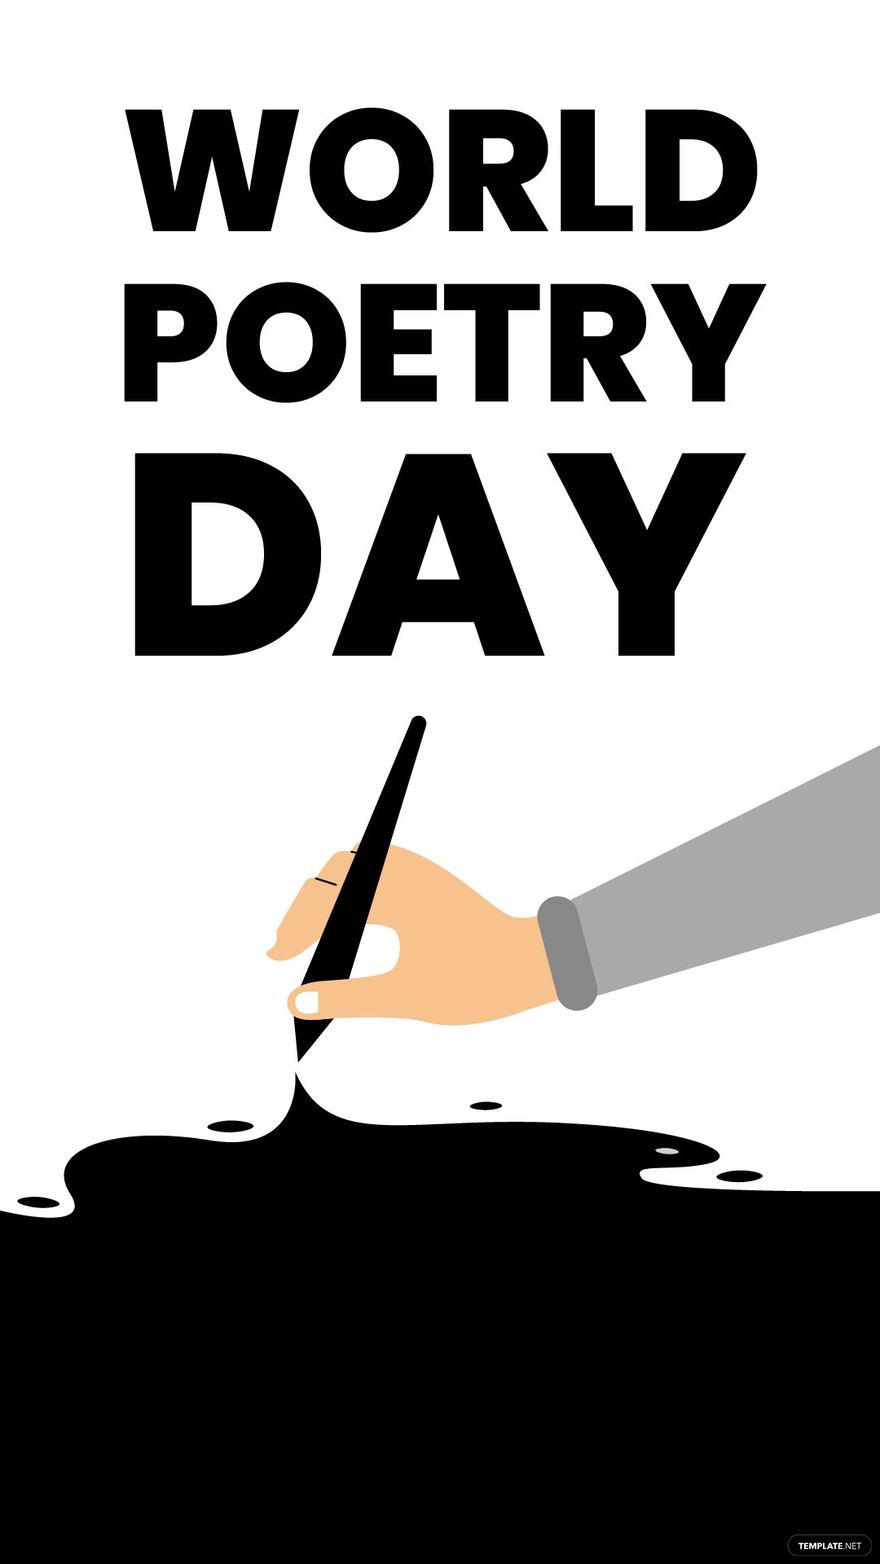 World Poetry Day iPhone Background in PDF, Illustrator, PSD, EPS, SVG, JPG, PNG